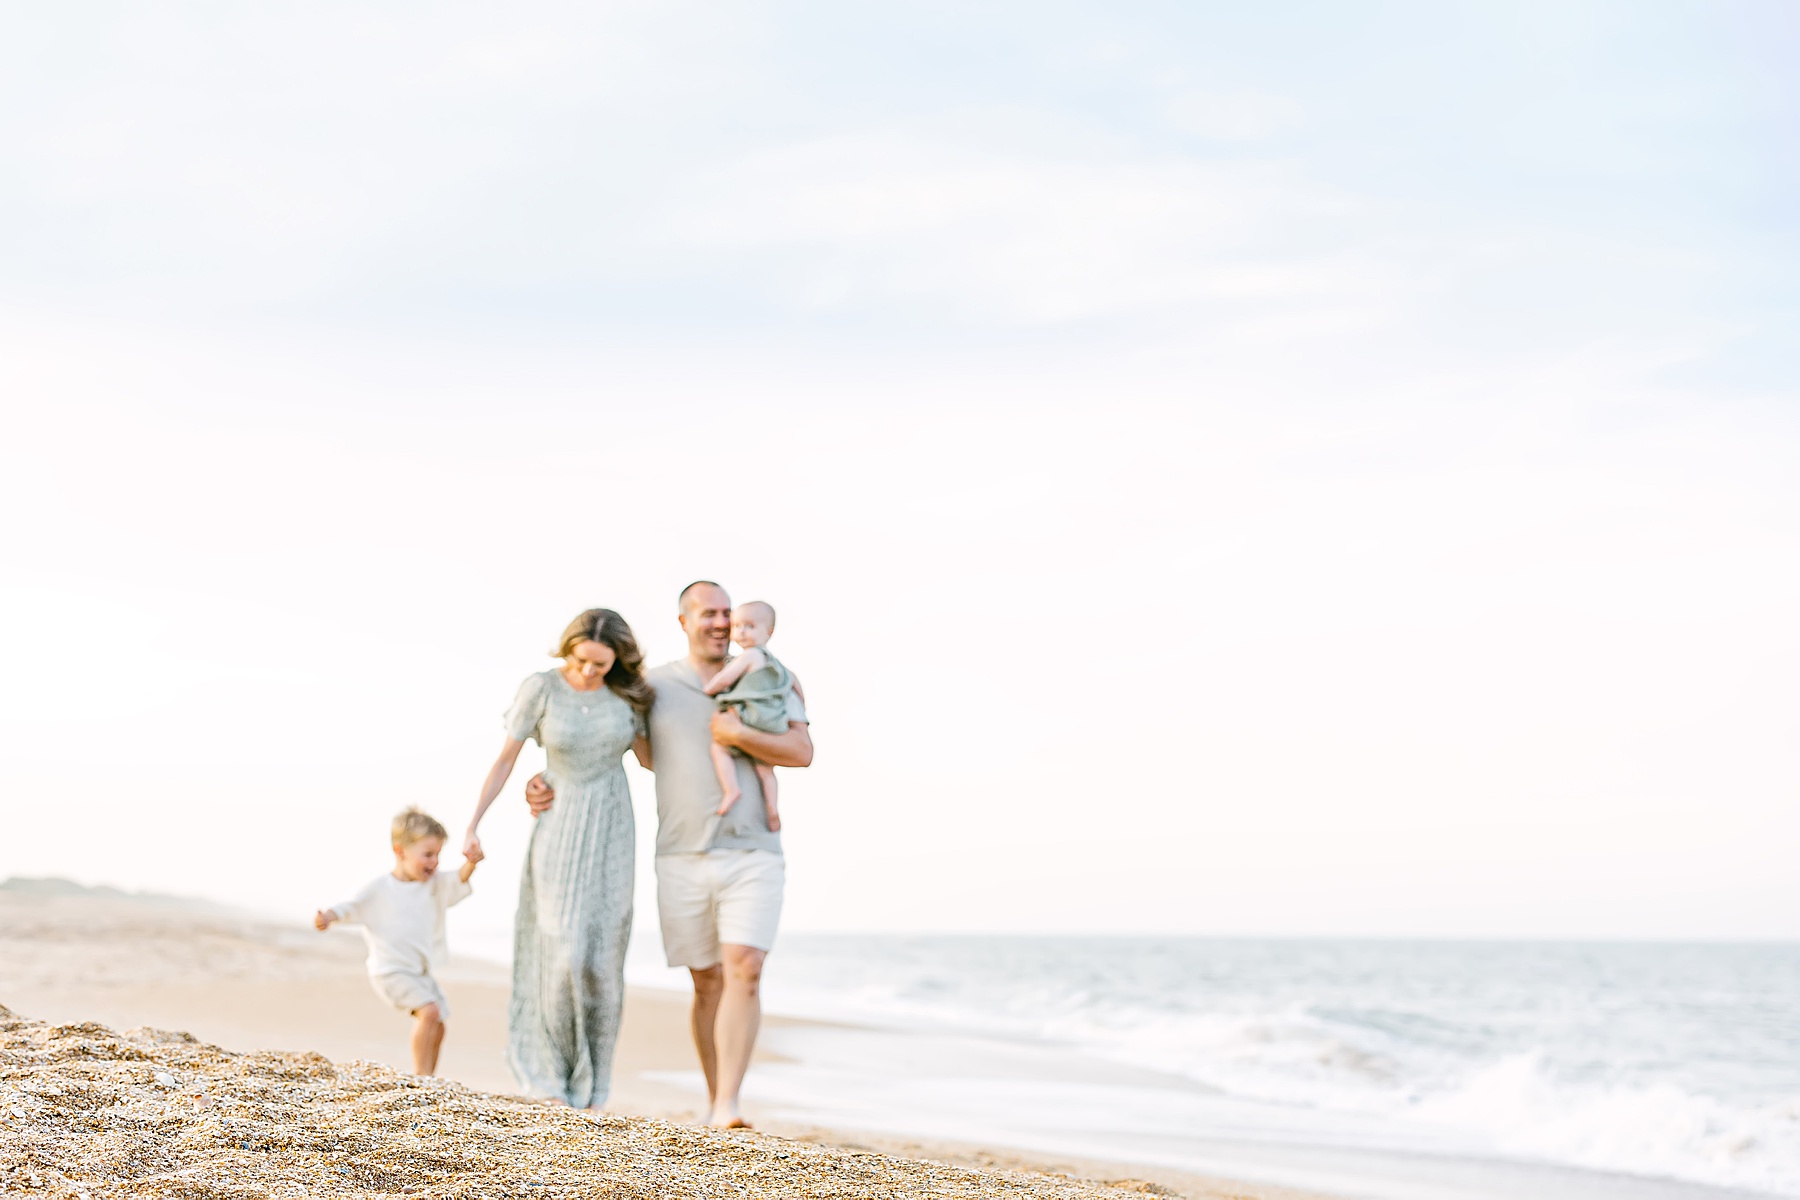 blurry photo of family walking on the beach together dressed in neutrals and sage green colors